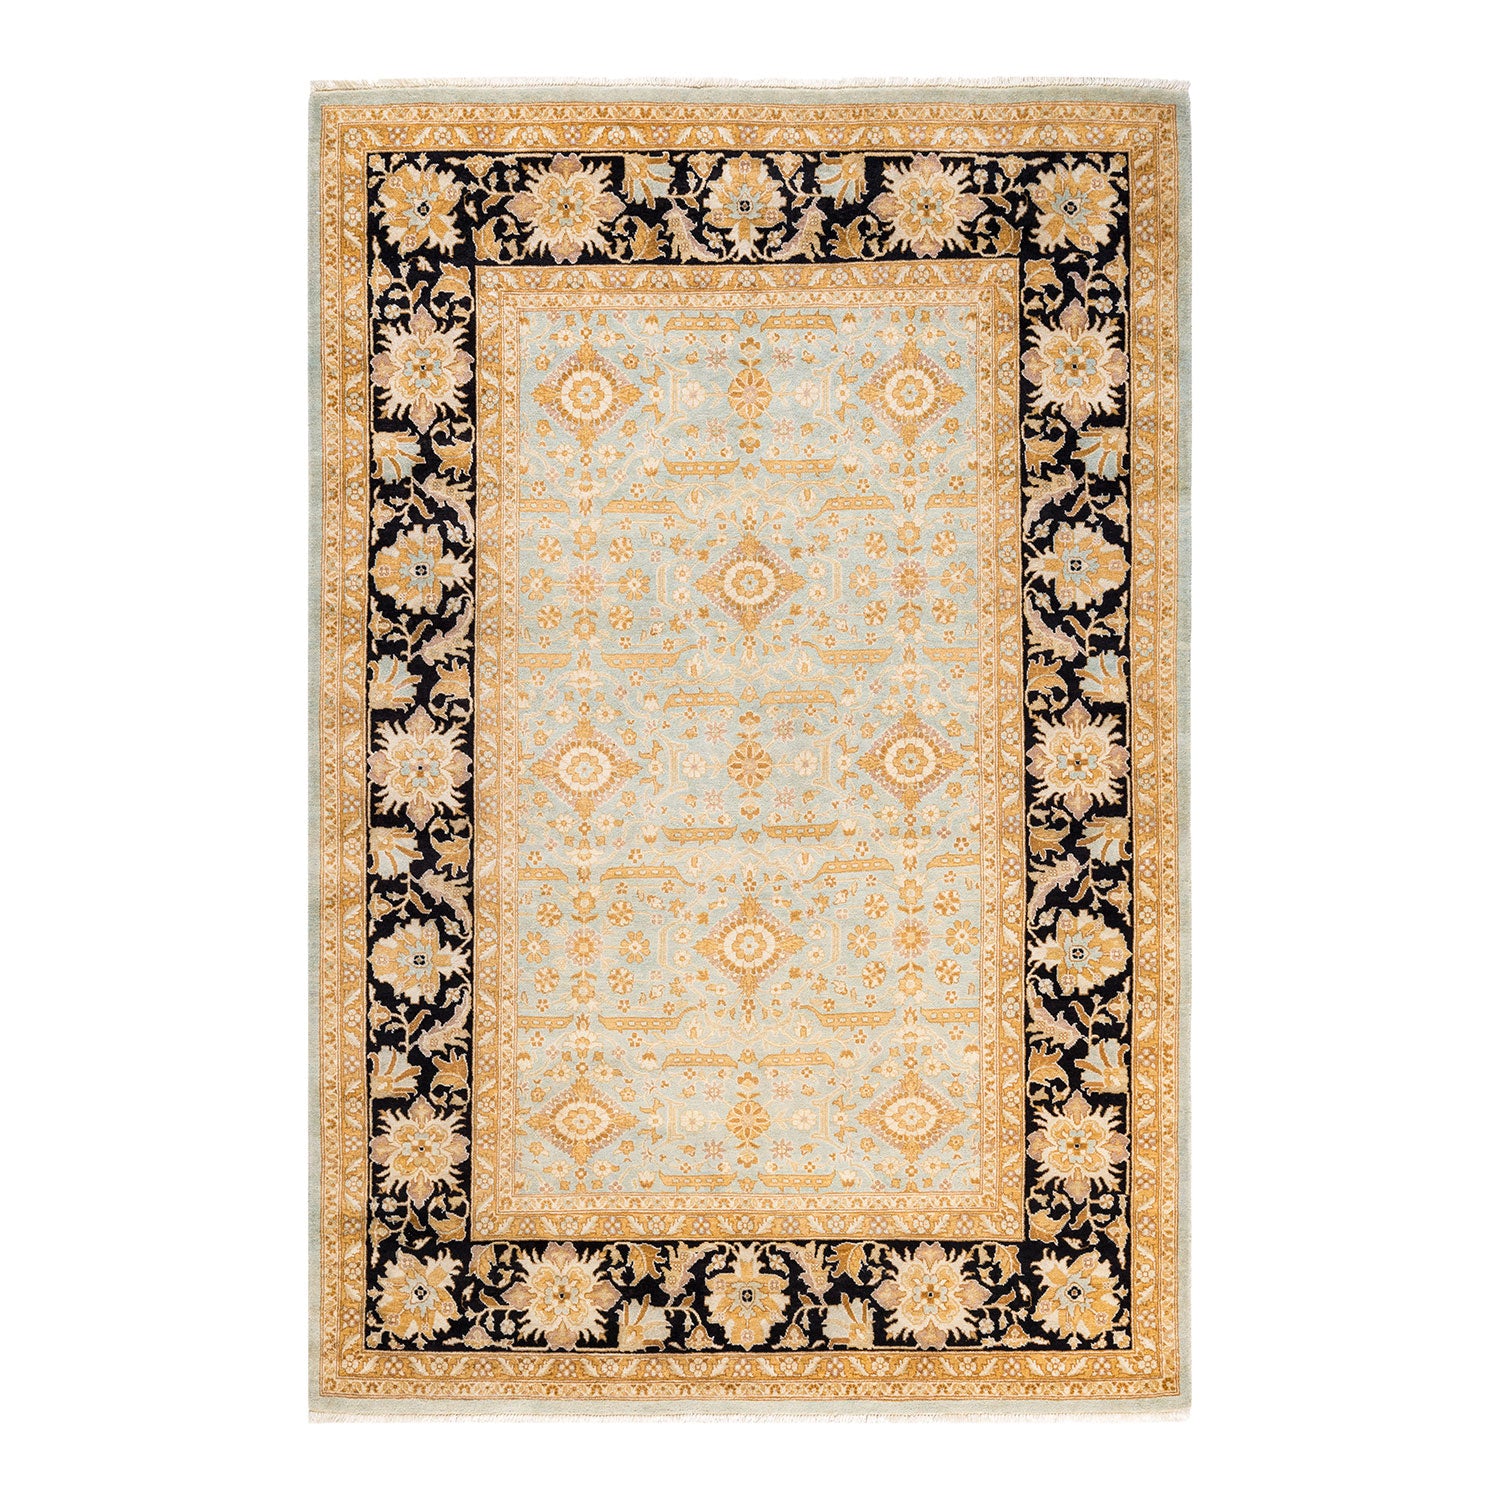 Exquisite ornate rug with intricate patterns, combining elegance and craftsmanship.